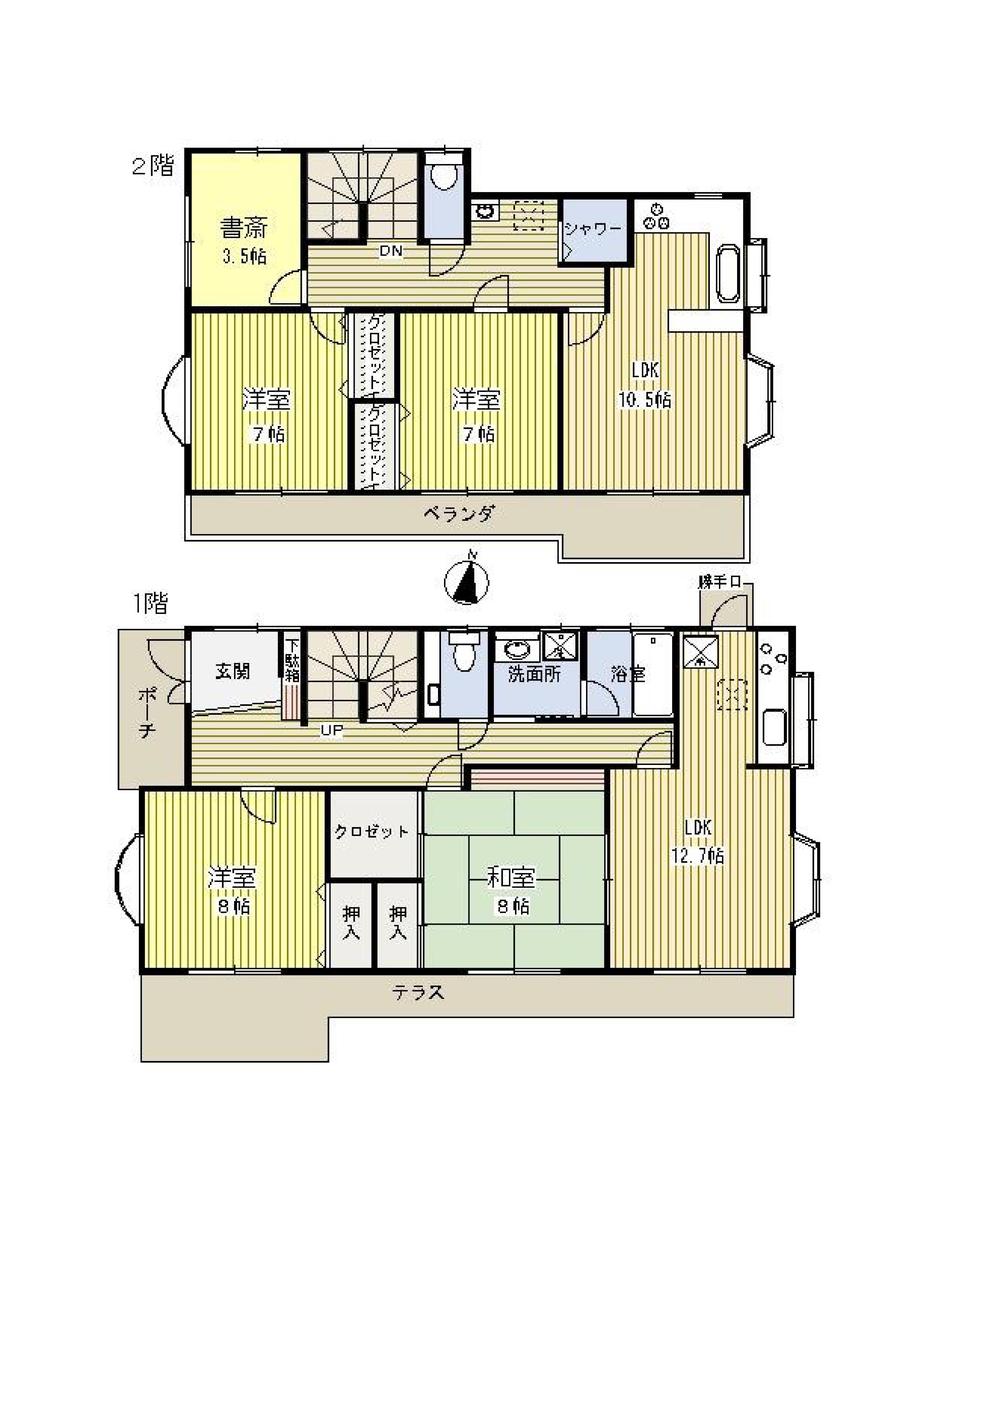 Floor plan. 43,800,000 yen, 5LLDDKK + S (storeroom), Land area 180.07 sq m , Building area 153.61 sq m 2 households can be separated